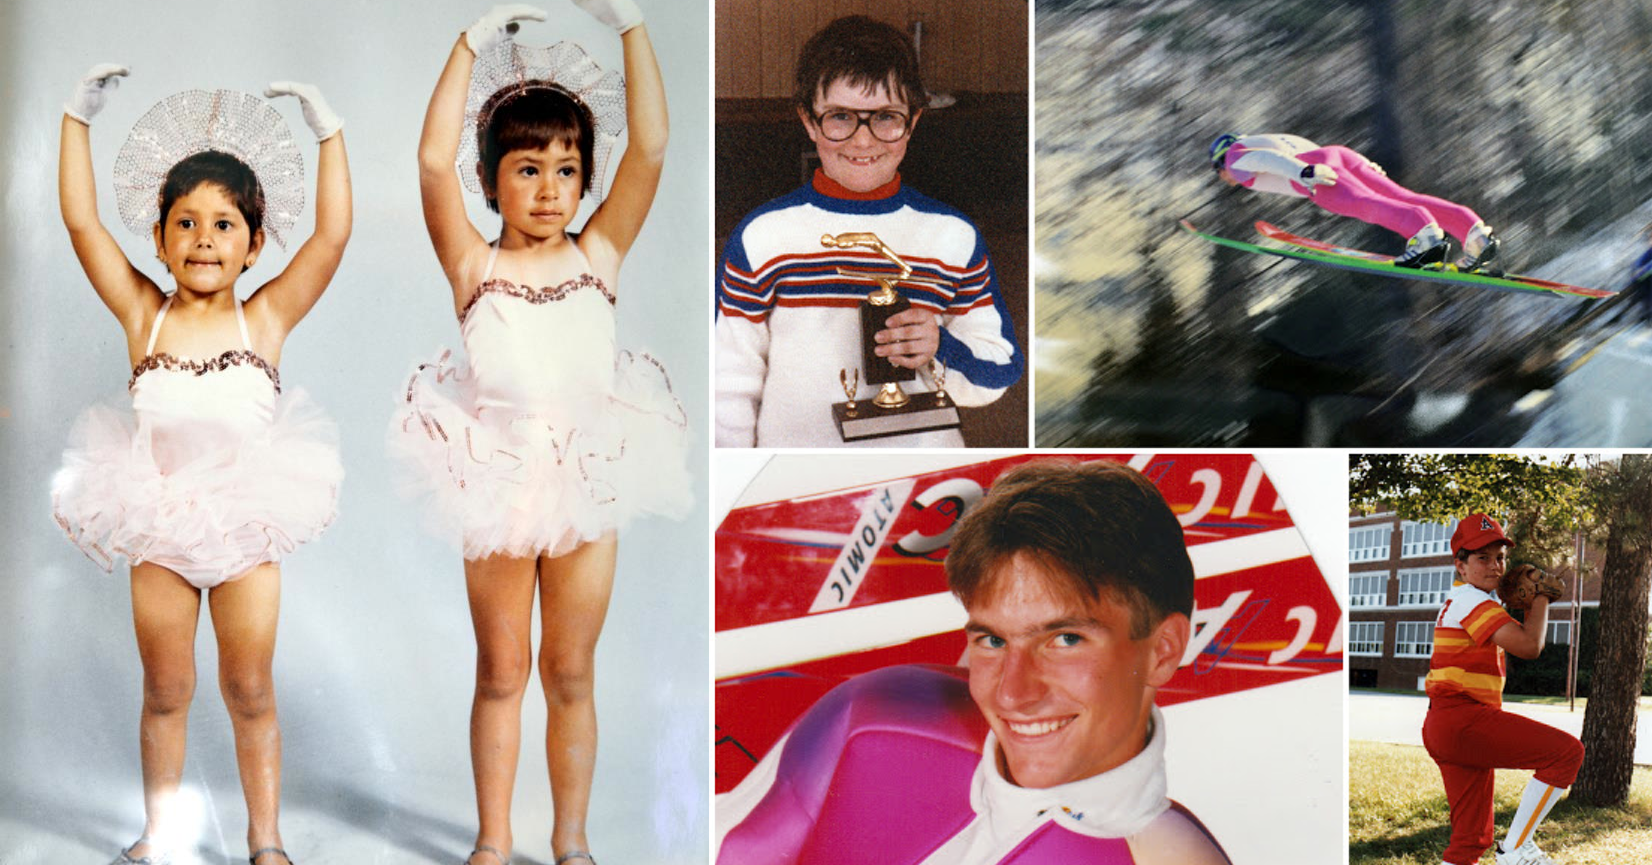 Throwback Thursday. What Do A Baby Ballerina & Ski Jumper Have In Common? | healthylivinghowto.com